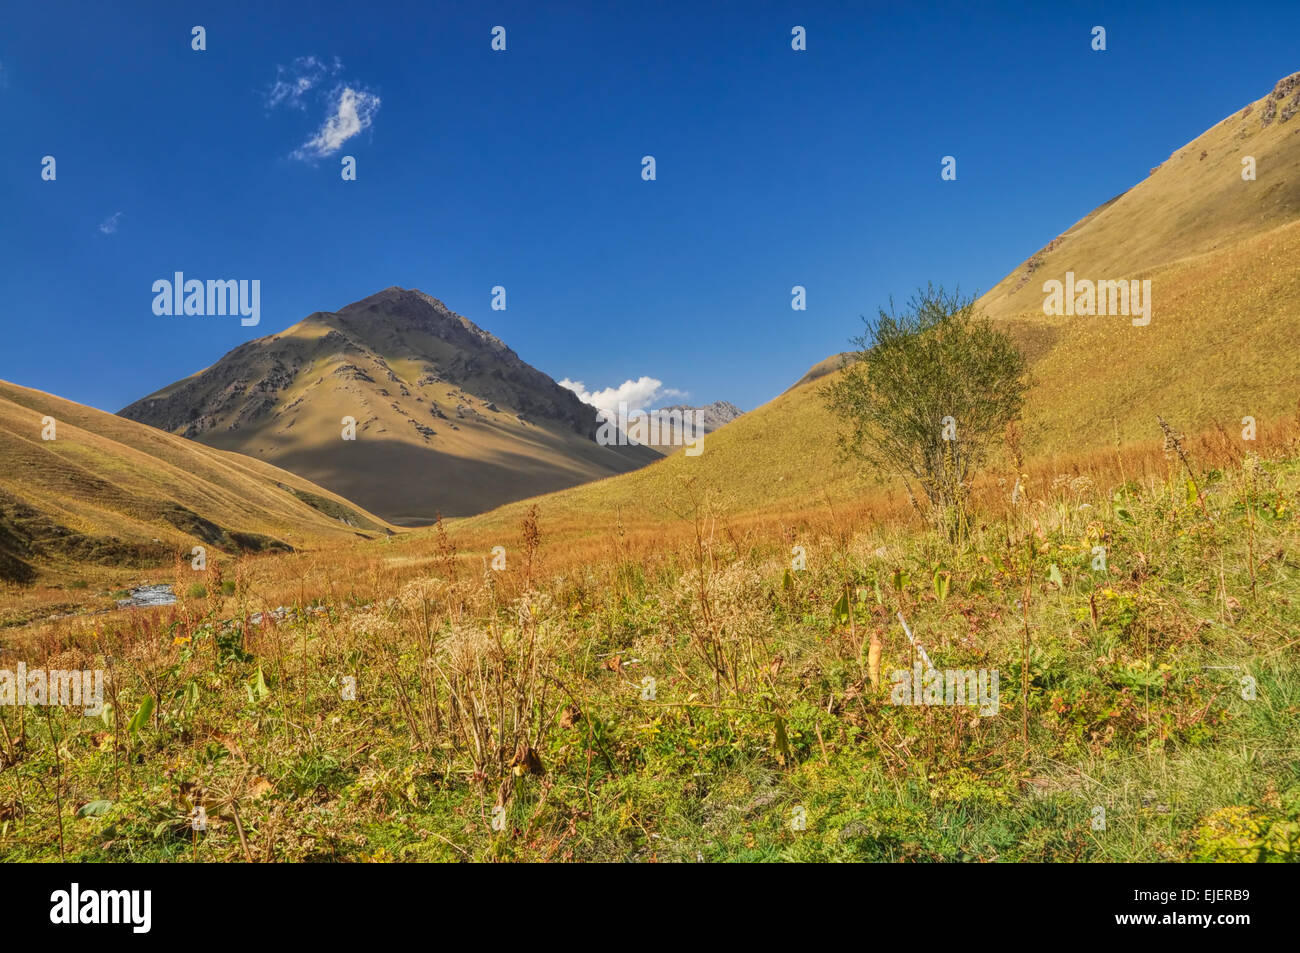 Picturesque green hills in Ala Archa national park in Tian Shan mountain range in Kyrgyzstan Stock Photo